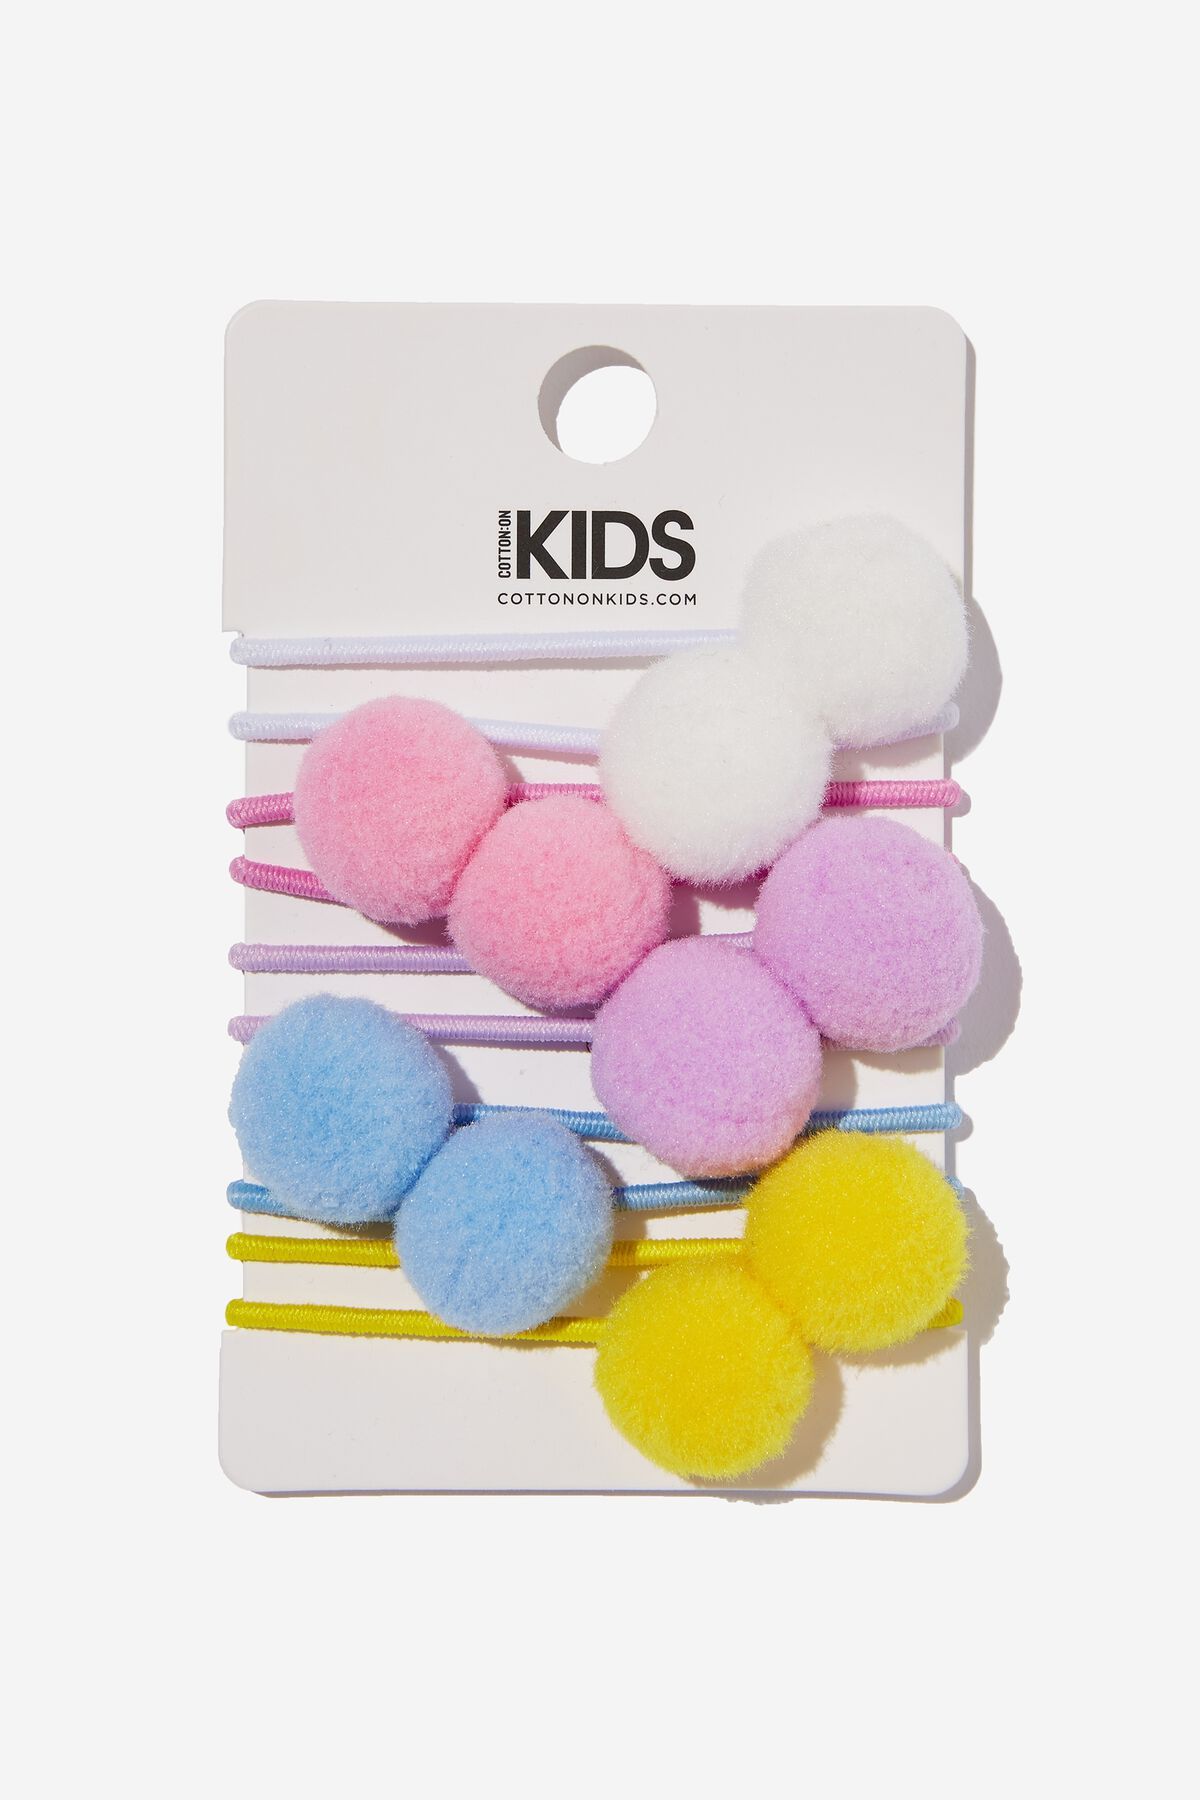 Knot Messy Hair Ties - Round | Cotton On (ANZ)